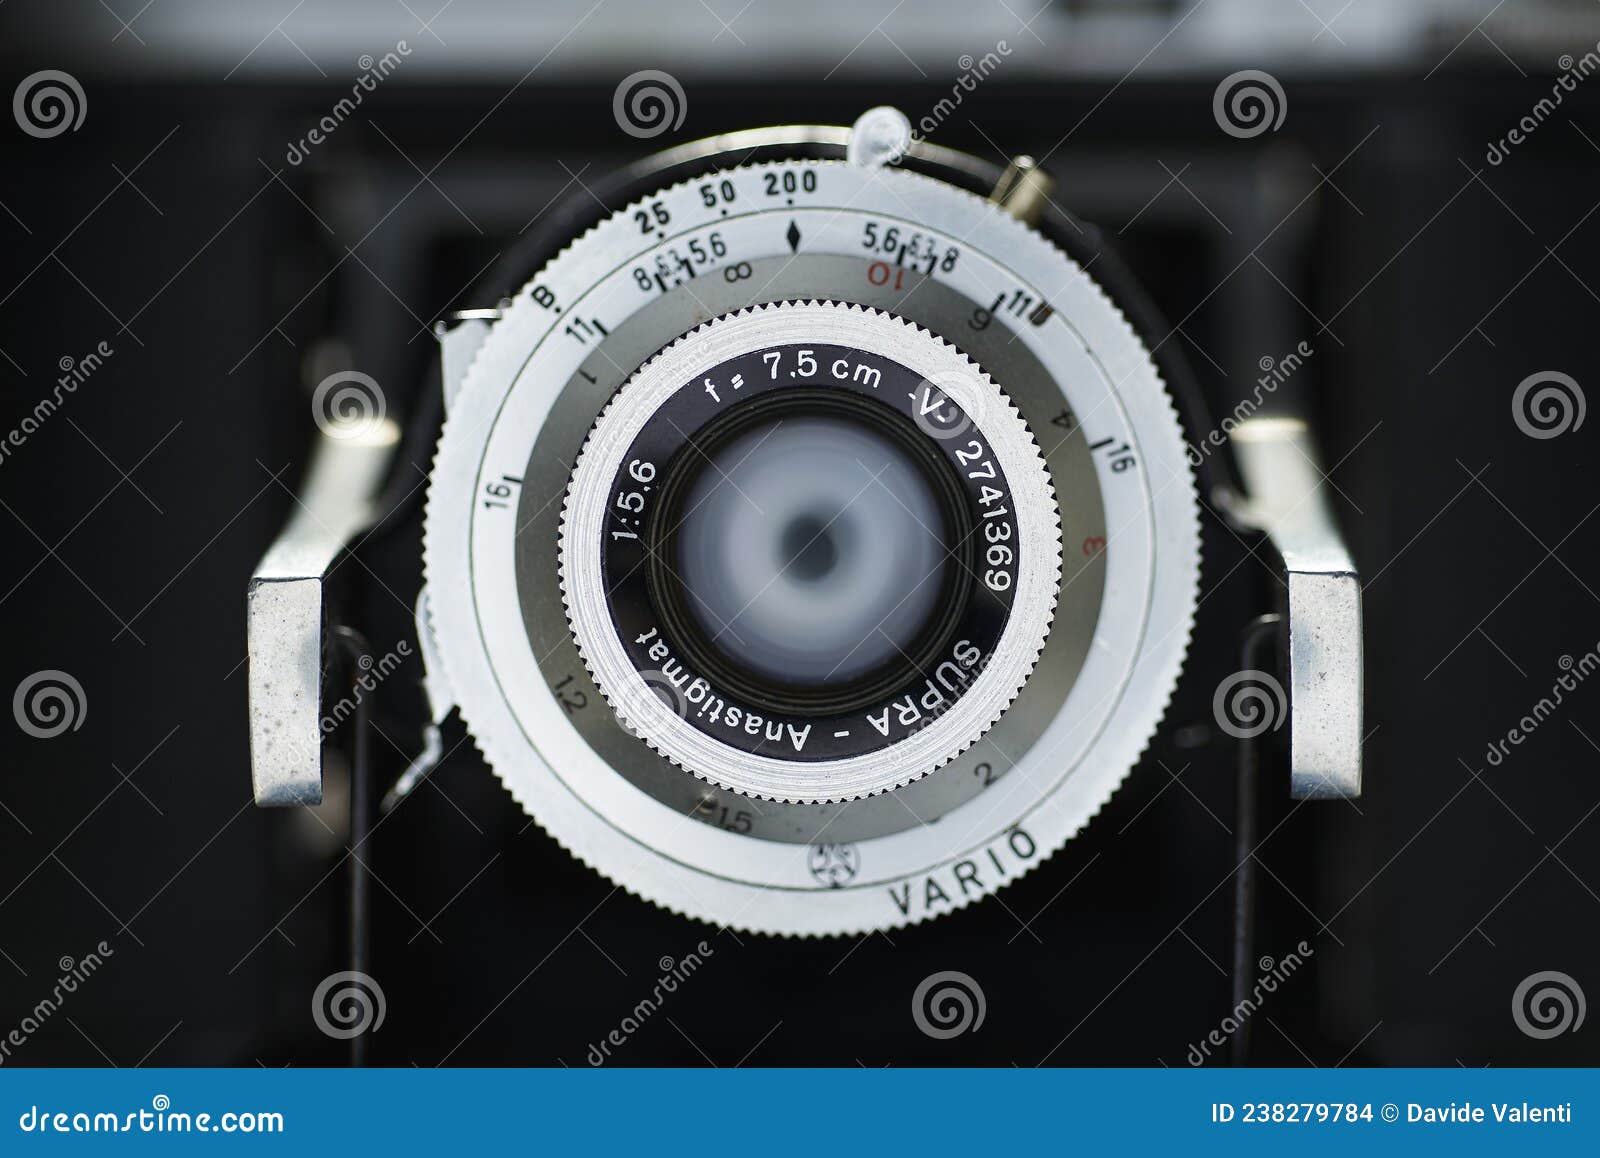 https://thumbs.dreamstime.com/z/vintage-compact-bellows-camera-nixon-trixette-year-front-view-lens-238279784.jpg